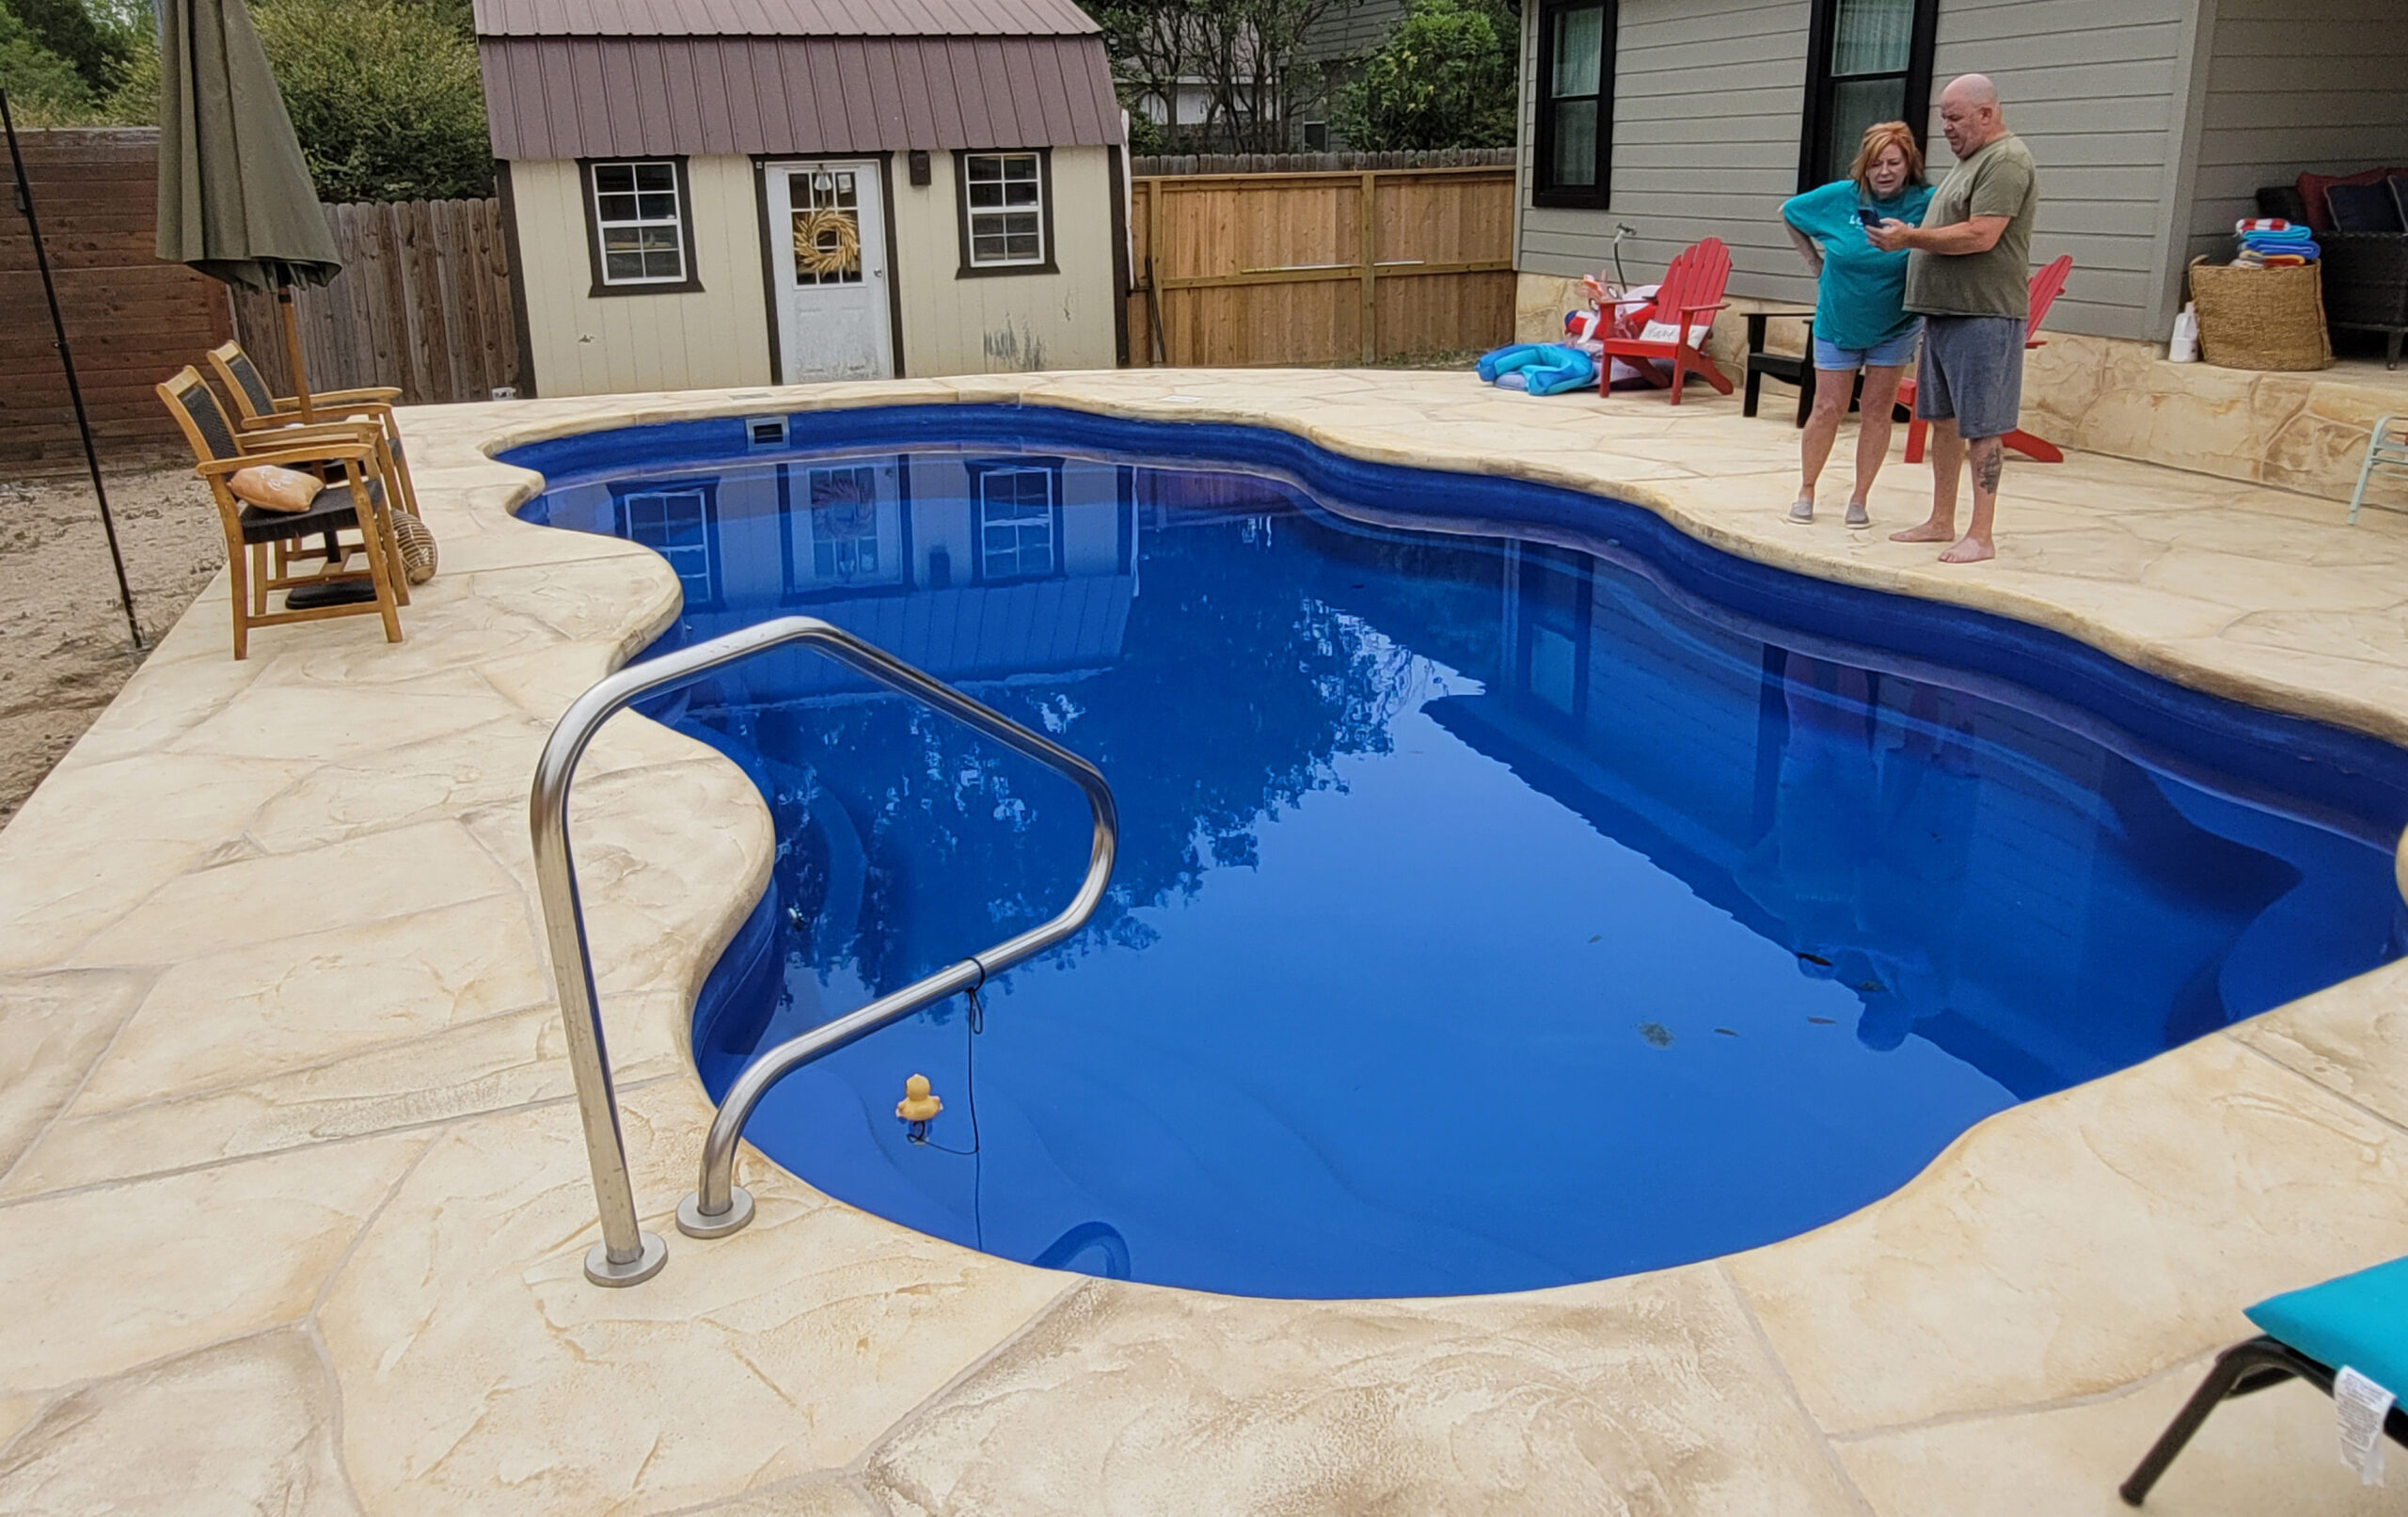 Inground Fiberglass Swimming Pools Tx Lonestar Pools for a private backyard oasis and staycation without the hassle of leaving town